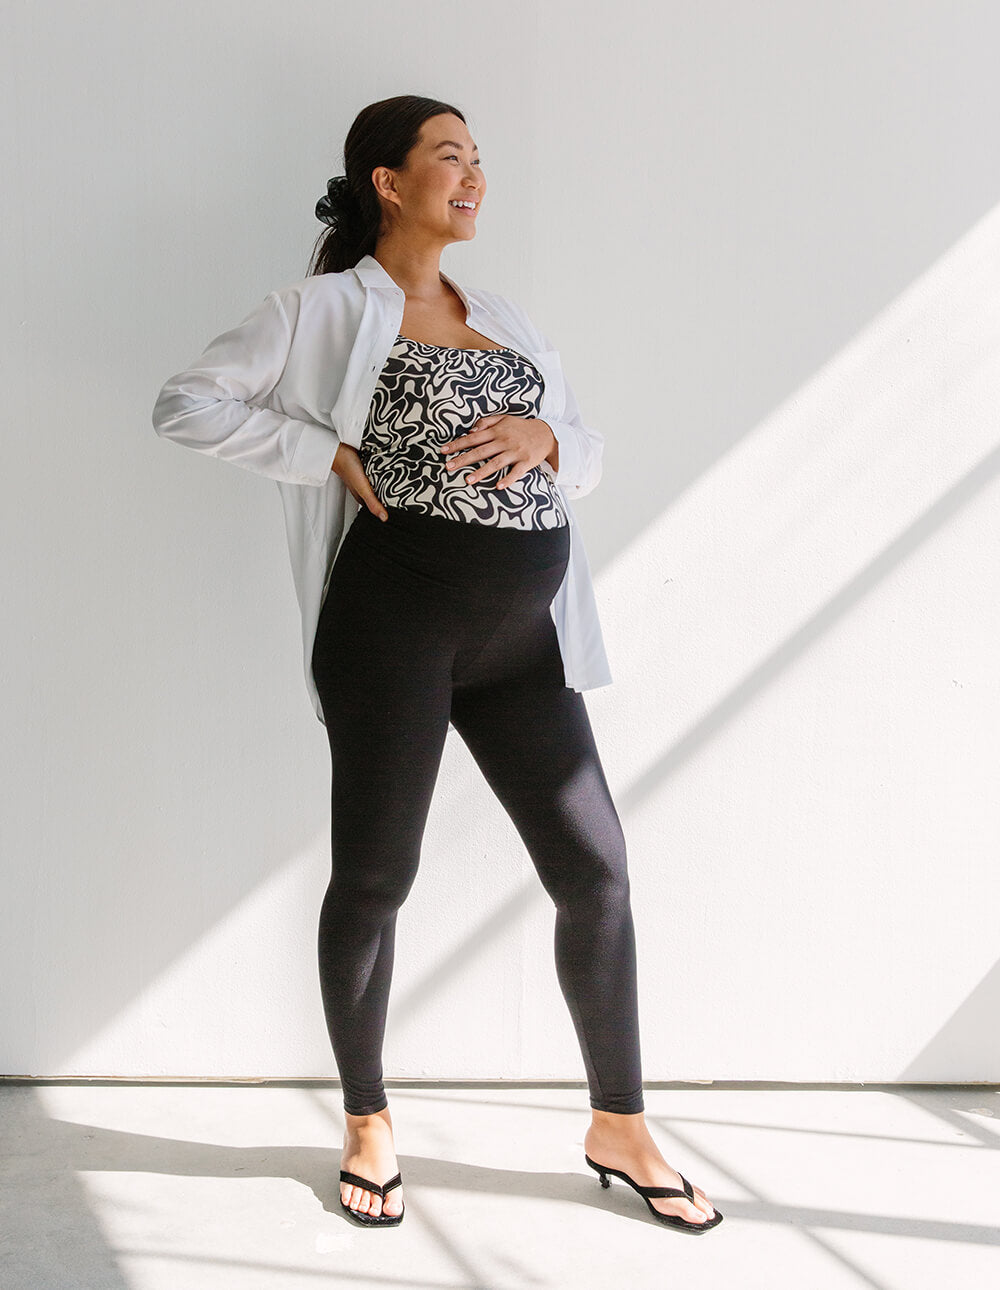 This Philly Brand's Maternity Clothes Are Stylish and Comfortable